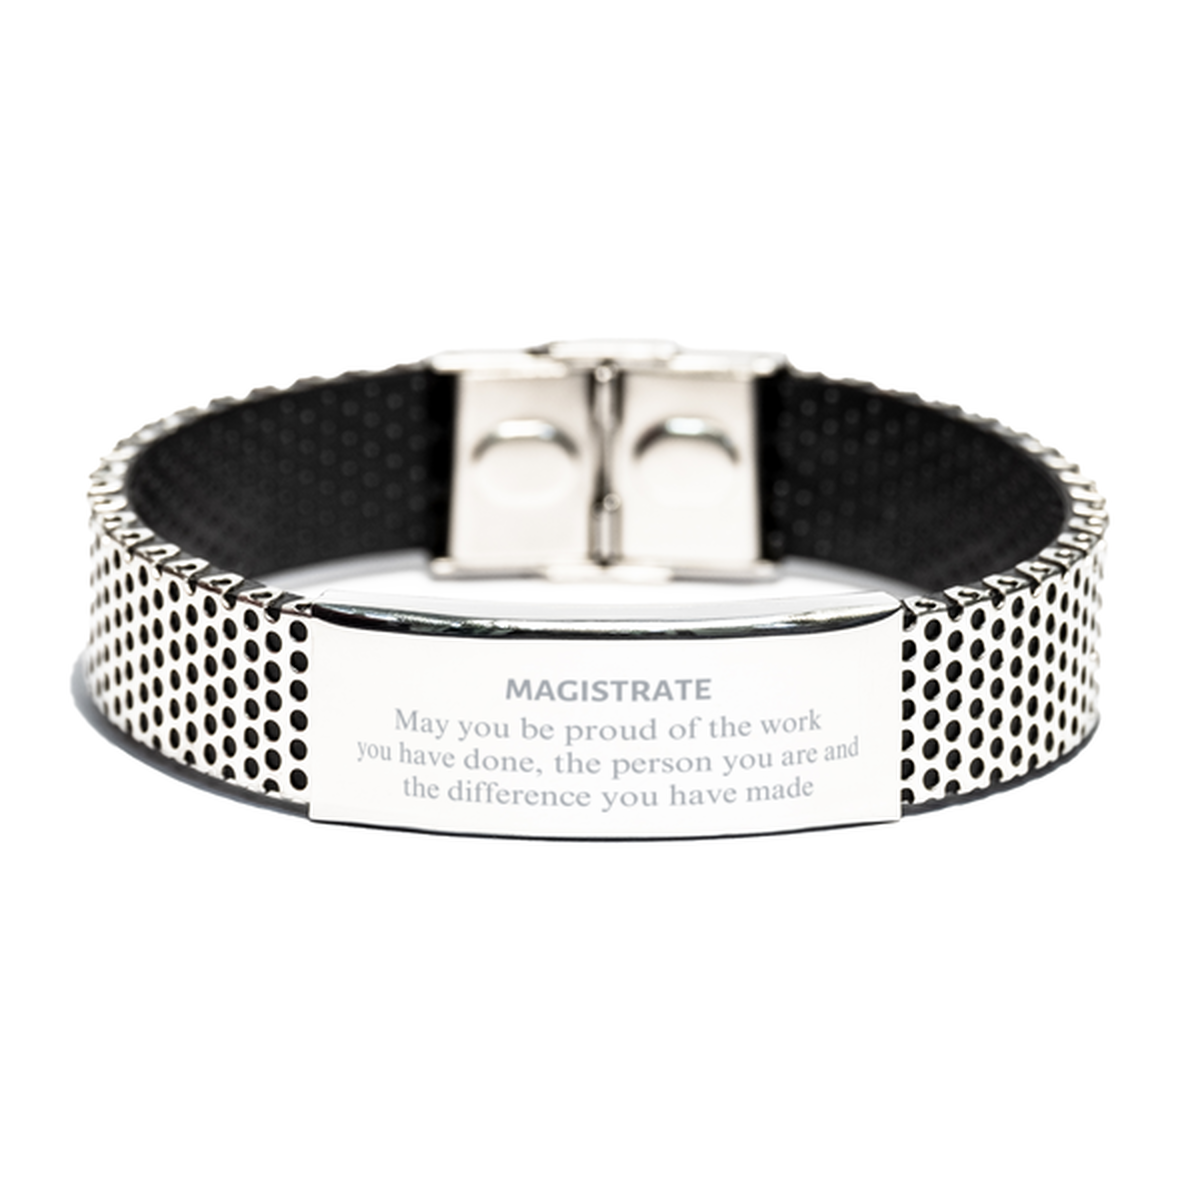 Magistrate May you be proud of the work you have done, Retirement Magistrate Stainless Steel Bracelet for Colleague Appreciation Gifts Amazing for Magistrate